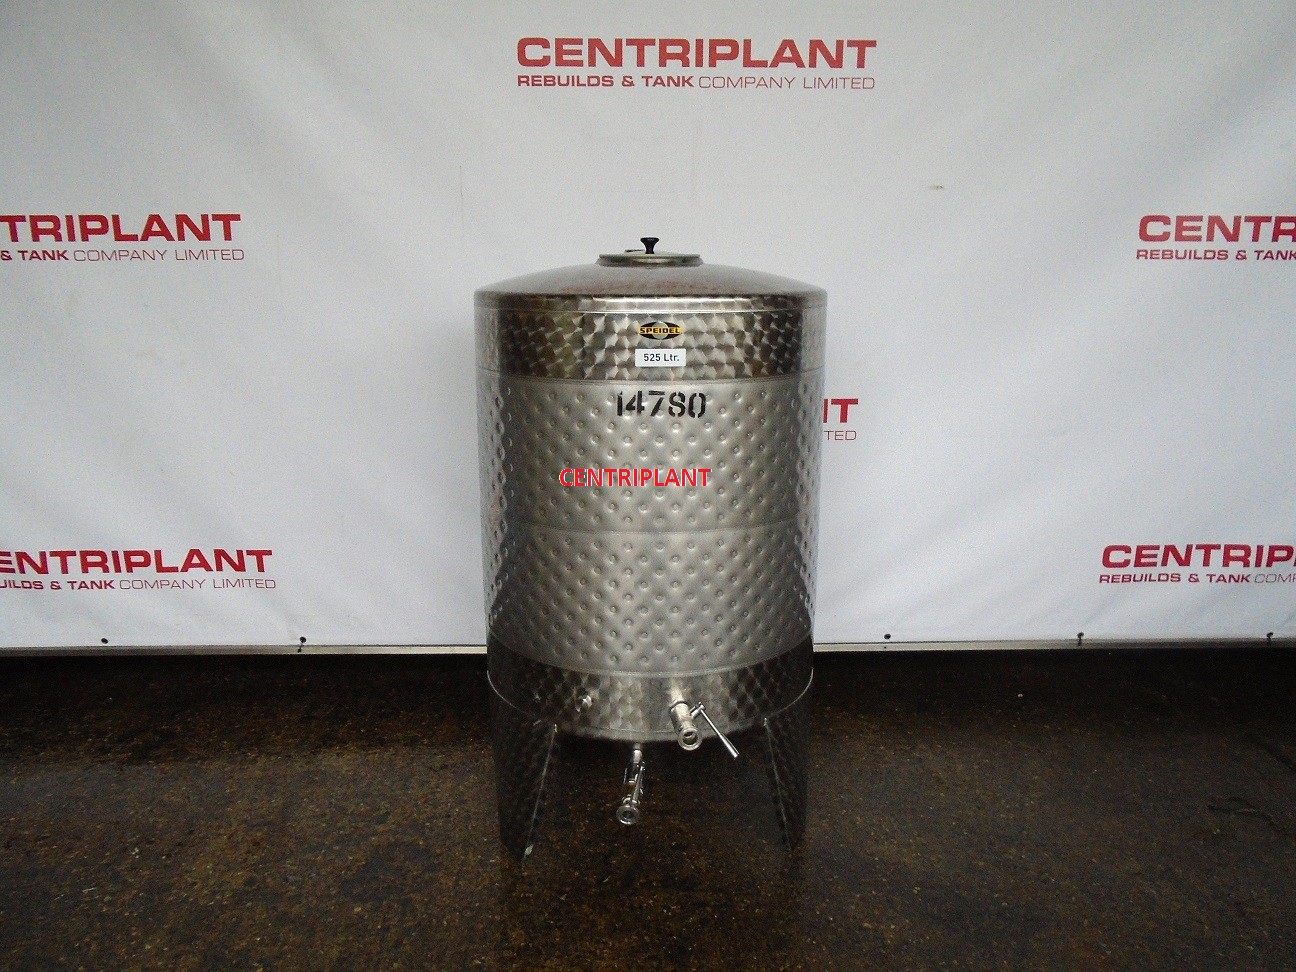 14780 - 525 LITRE STAINLESS STEEL CHILLED JACKETED TANKS